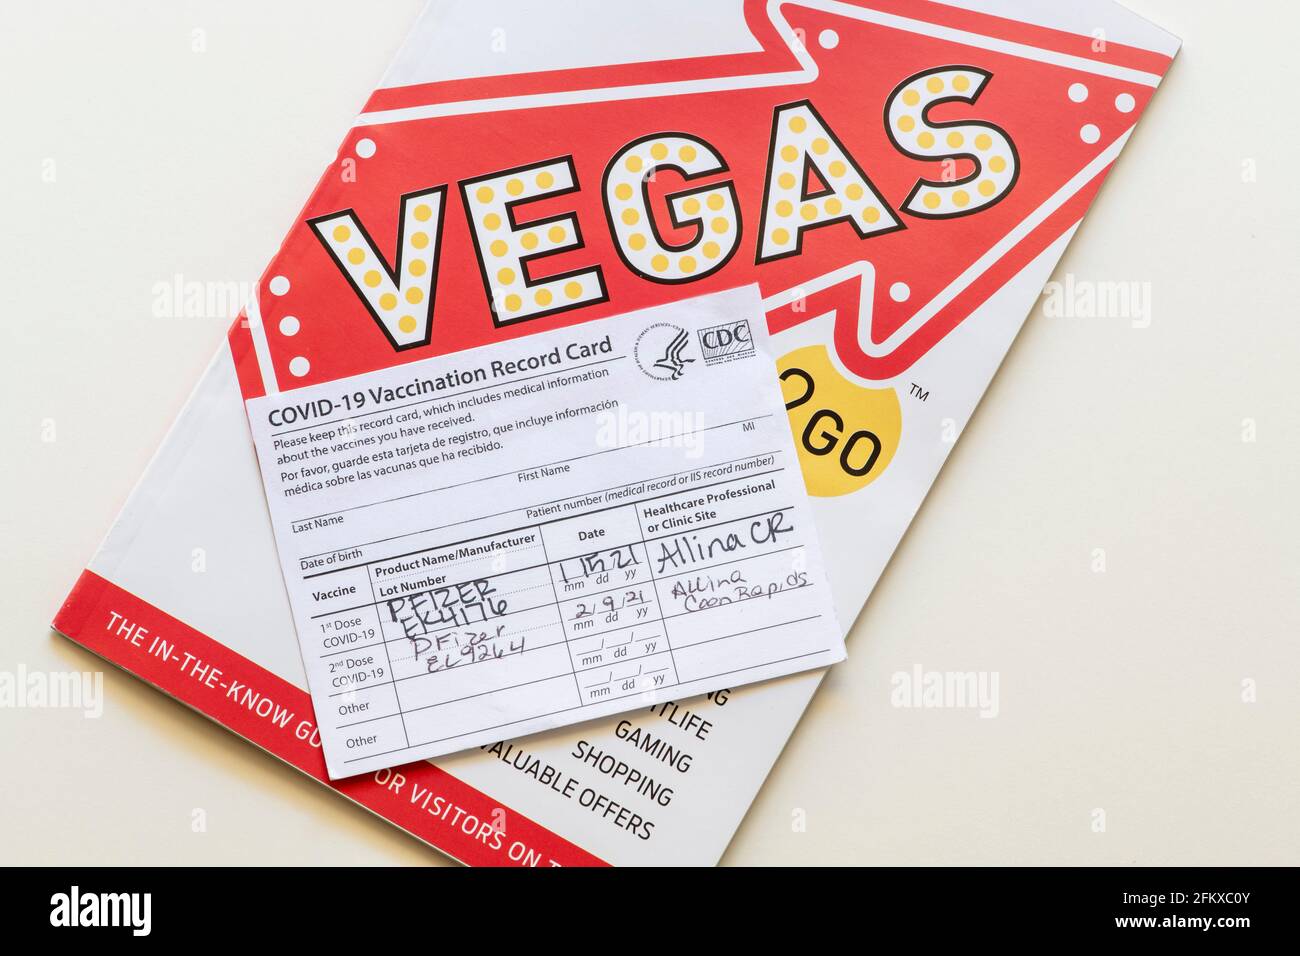 Minnesota; USA.  Covid-19 vaccination record card with both shots and Vegas travel brochure. Stock Photo